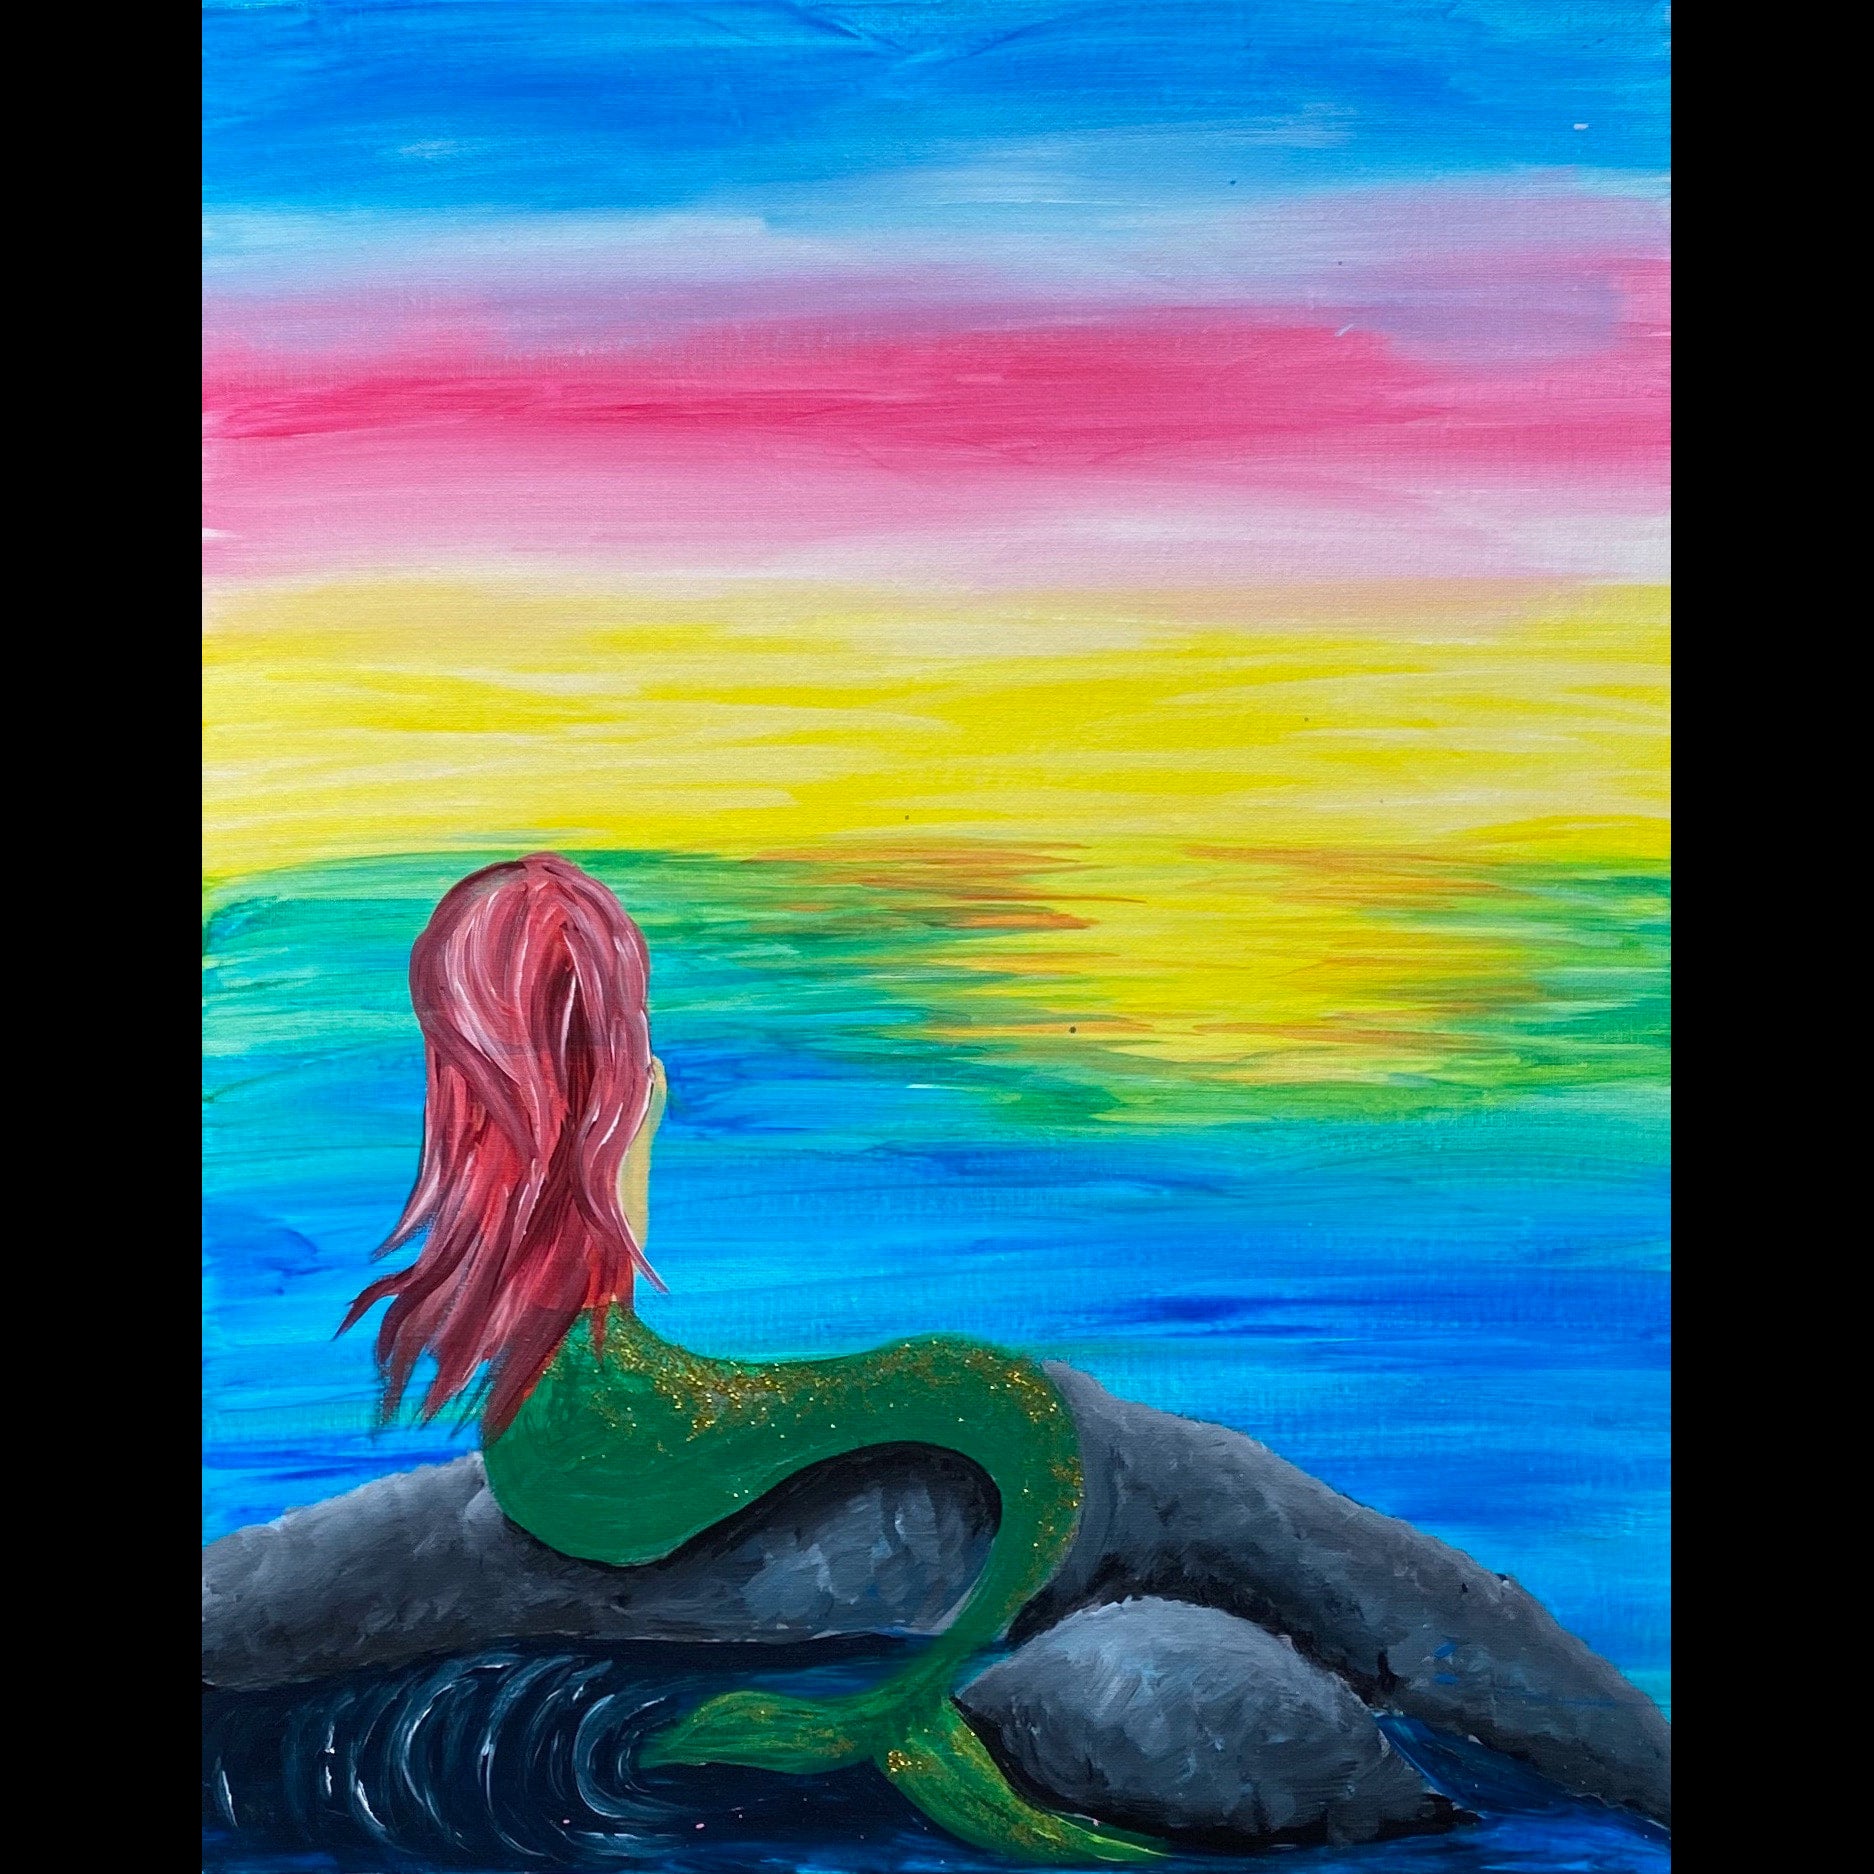 Online Painting Class - Mermaid Vibes (Virtual Paint Night at Home)